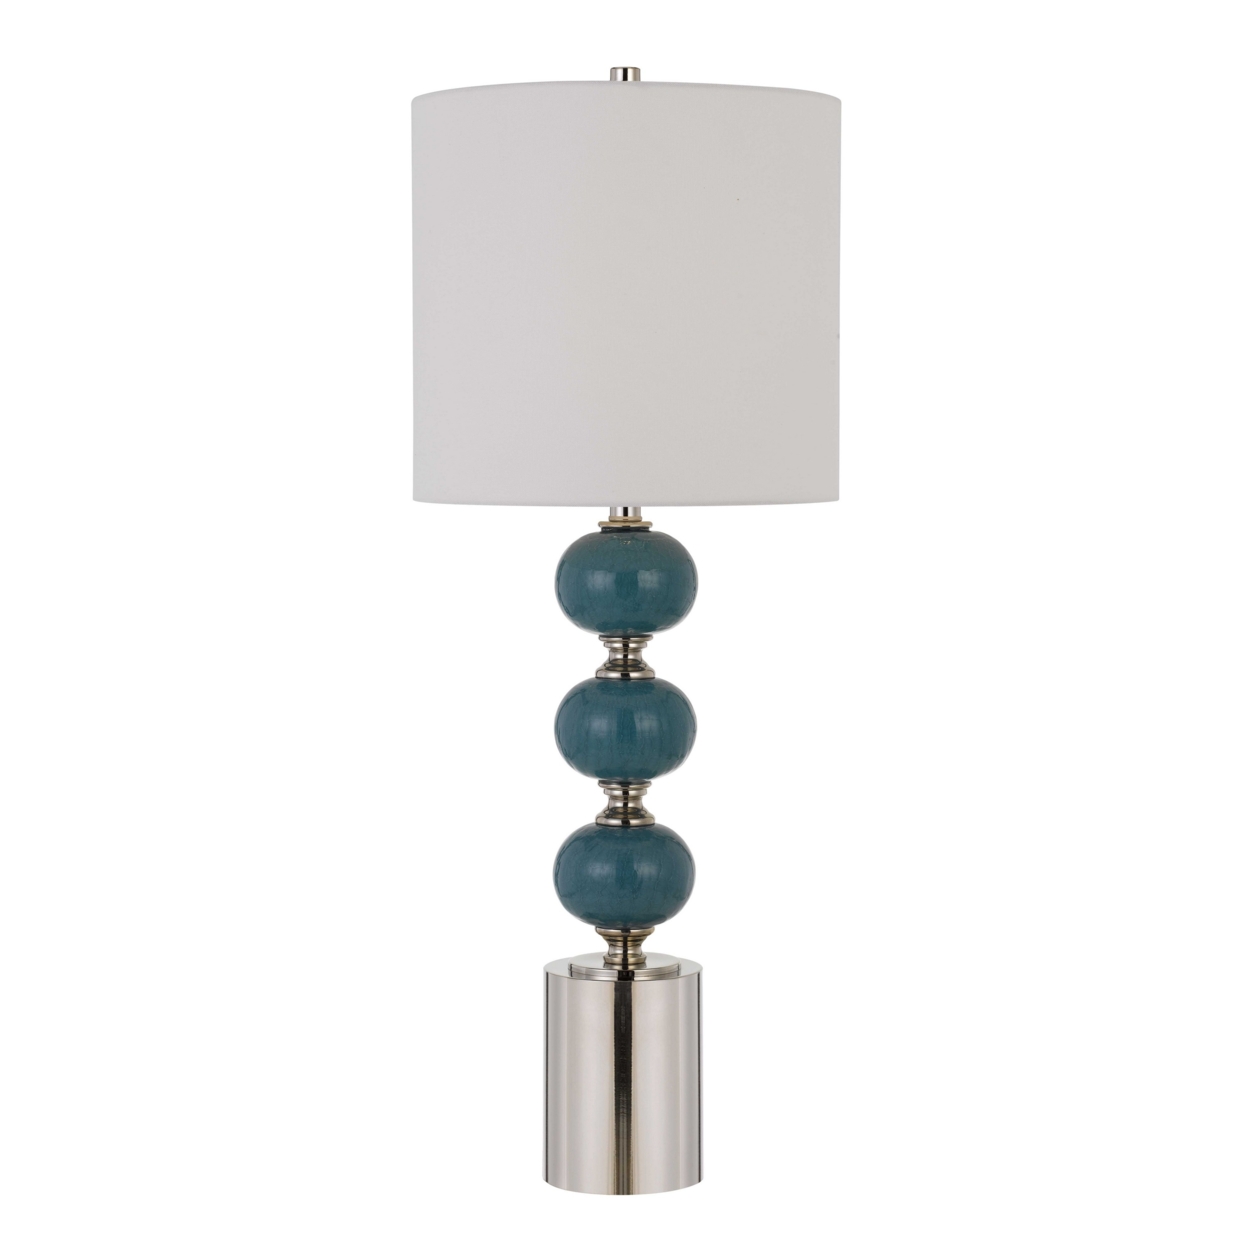 Stacked Ball Design Table Lamp With Fabric Shade, Set Of 2,Blue And Silver- Saltoro Sherpi